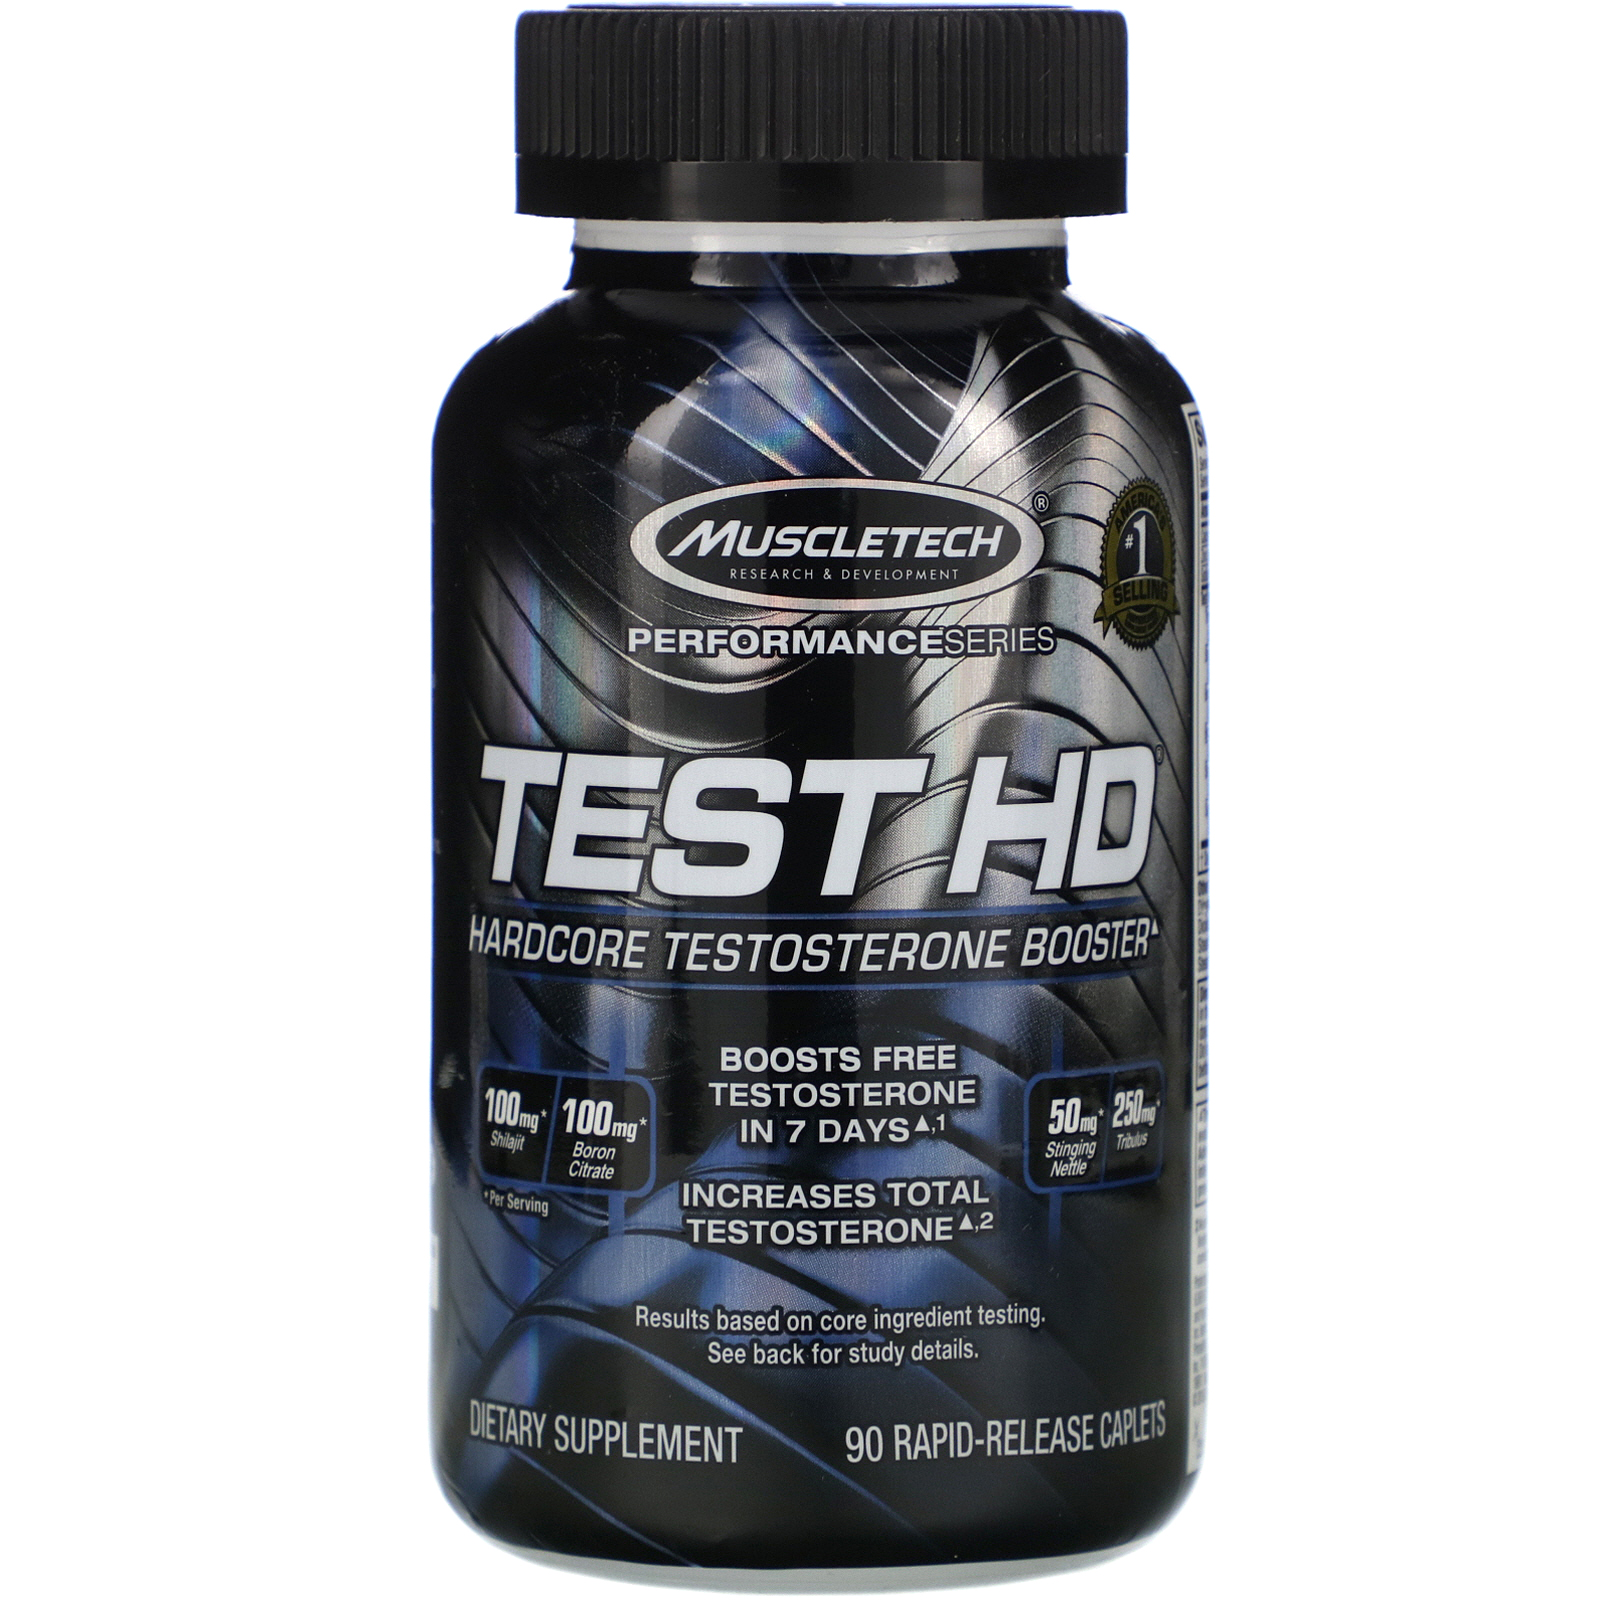 Count on testosterone booster to increase your muscle mass post thumbnail image